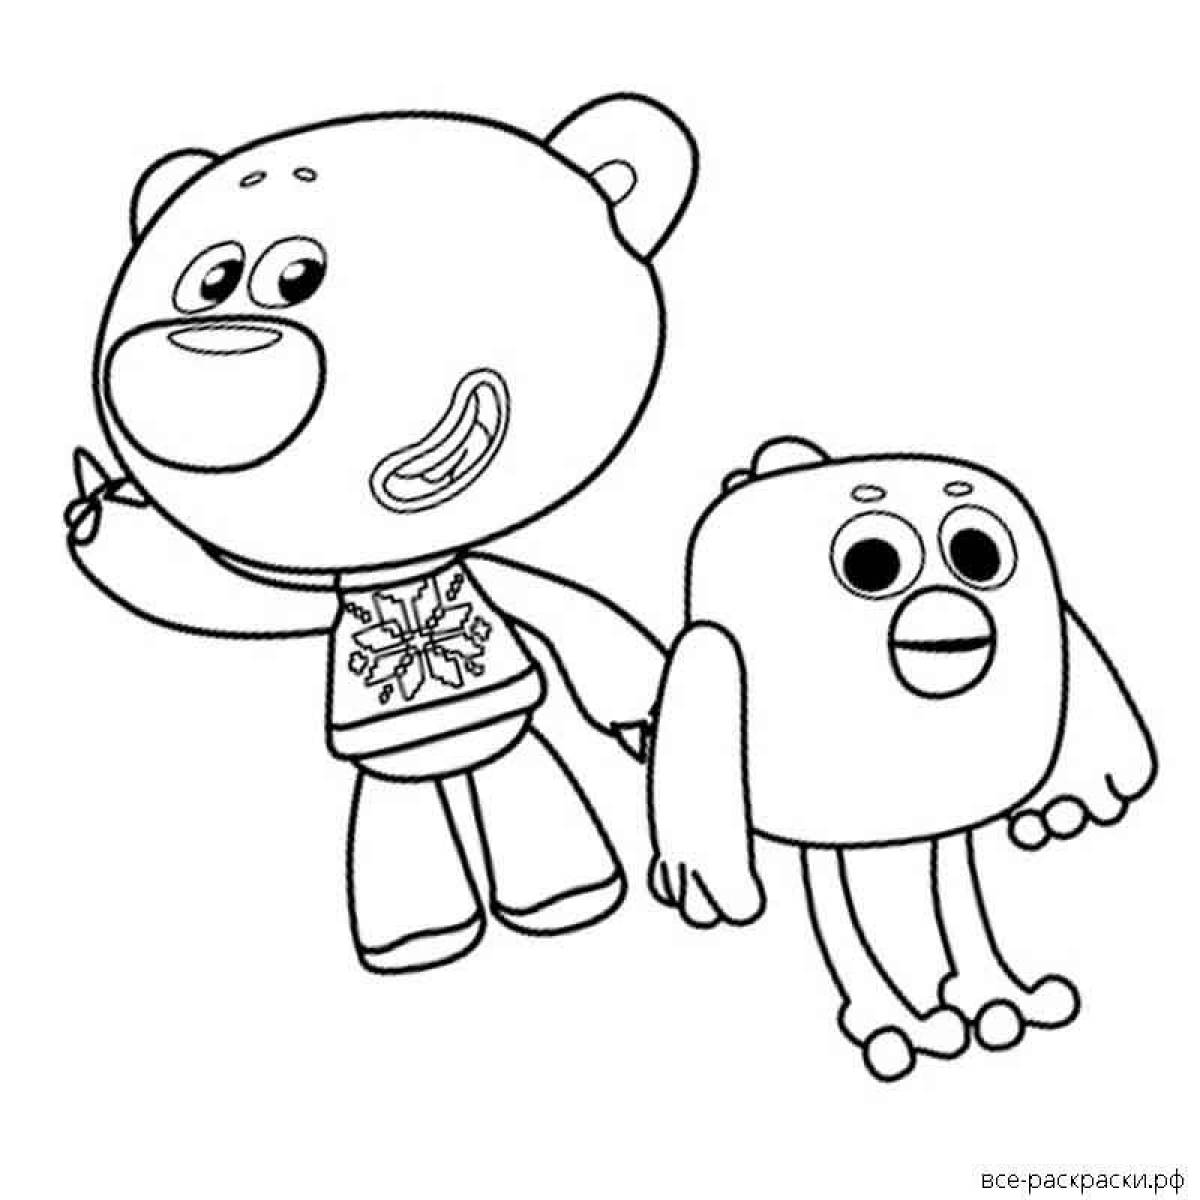 Adorable bear coloring pages for kids